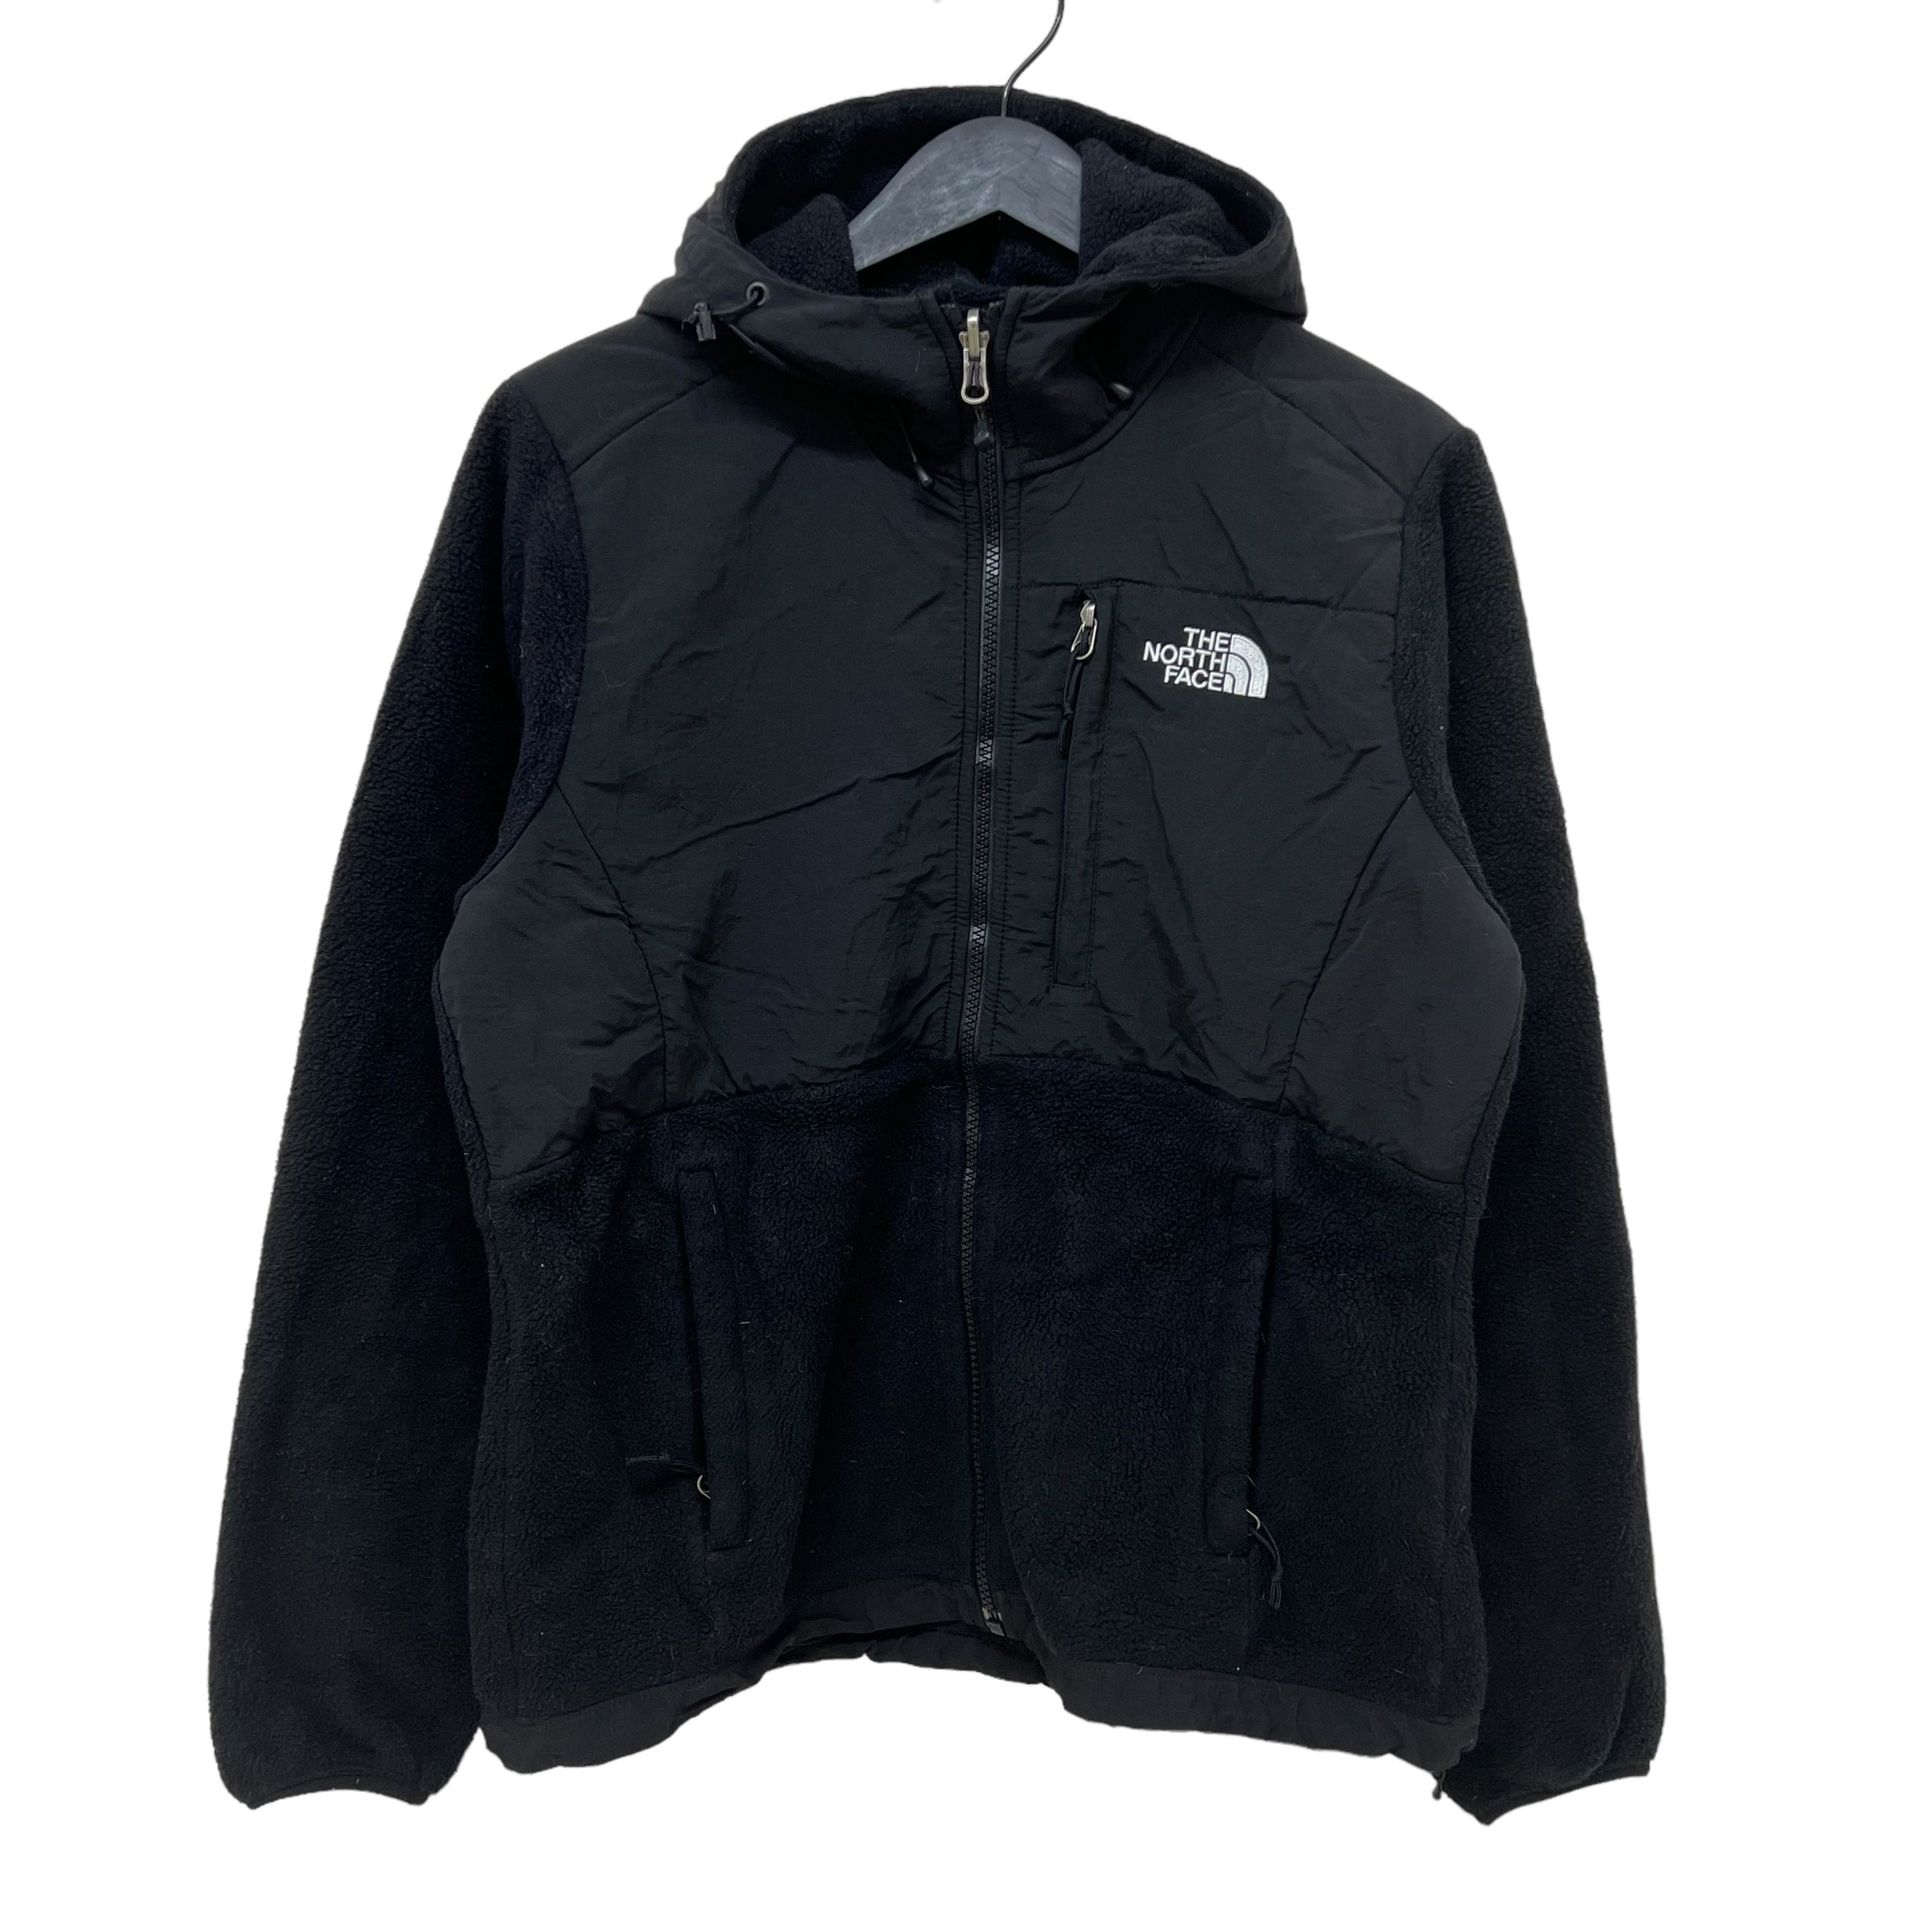 THE NORTH FACE – GRIZZLY ONLINE